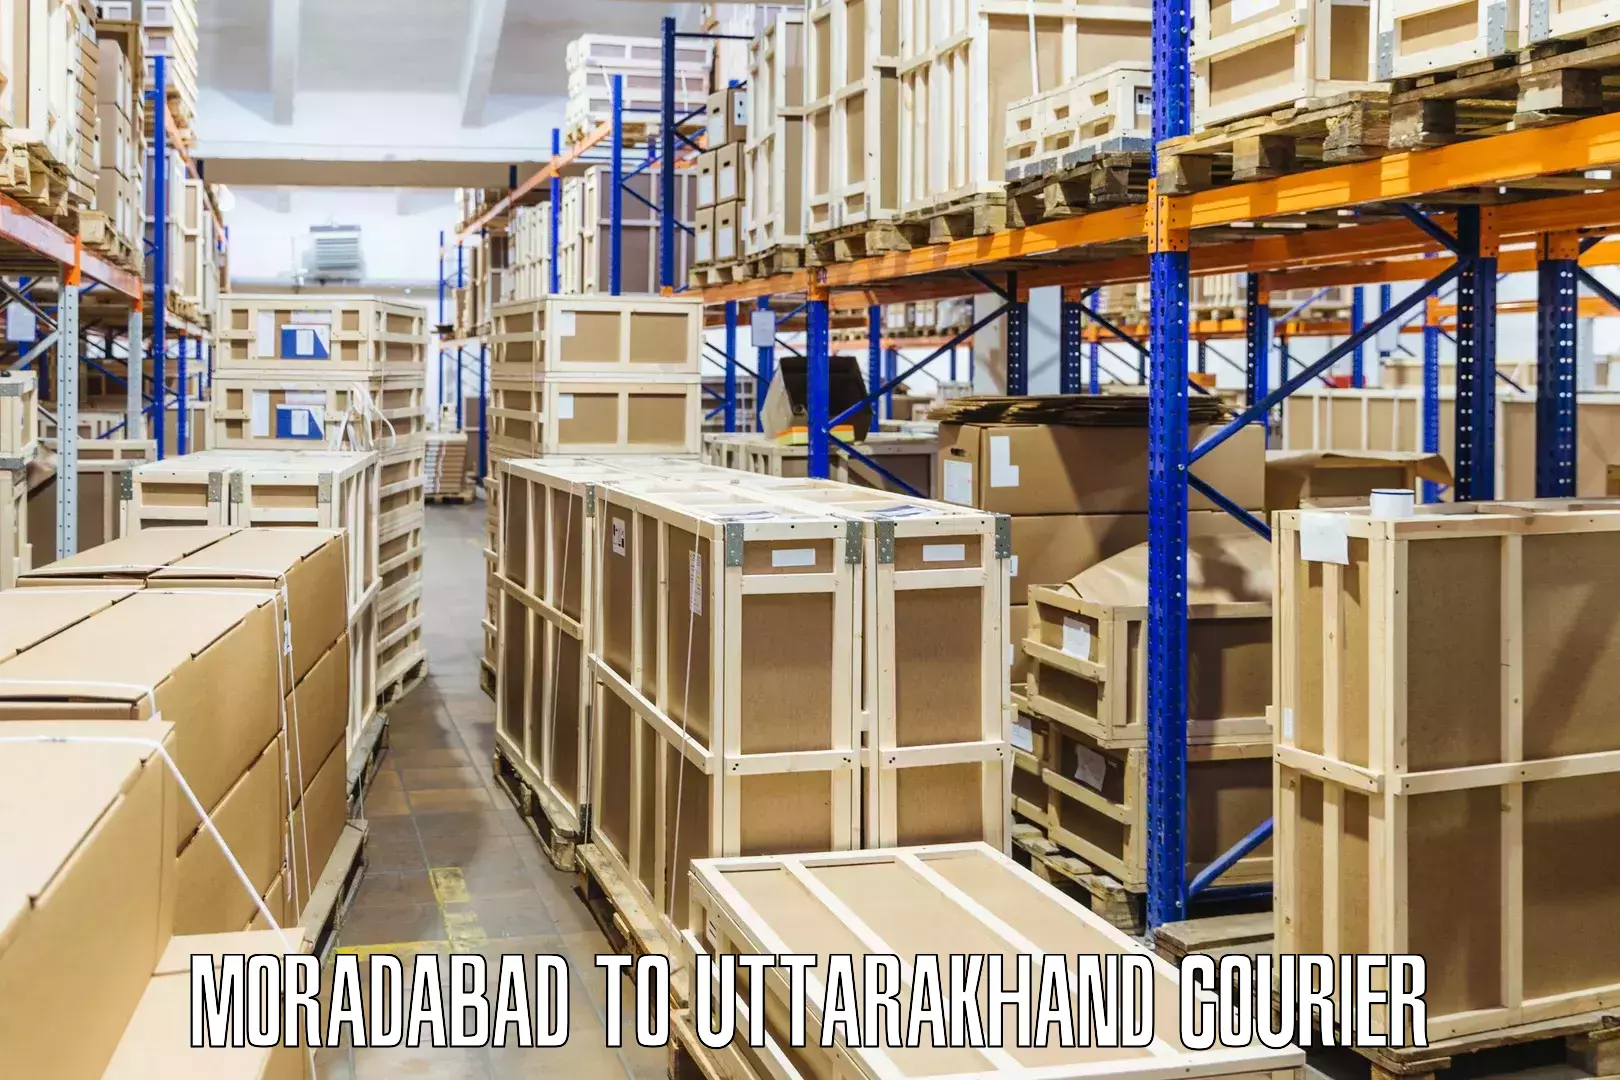 Global shipping networks in Moradabad to Bhagwanpur